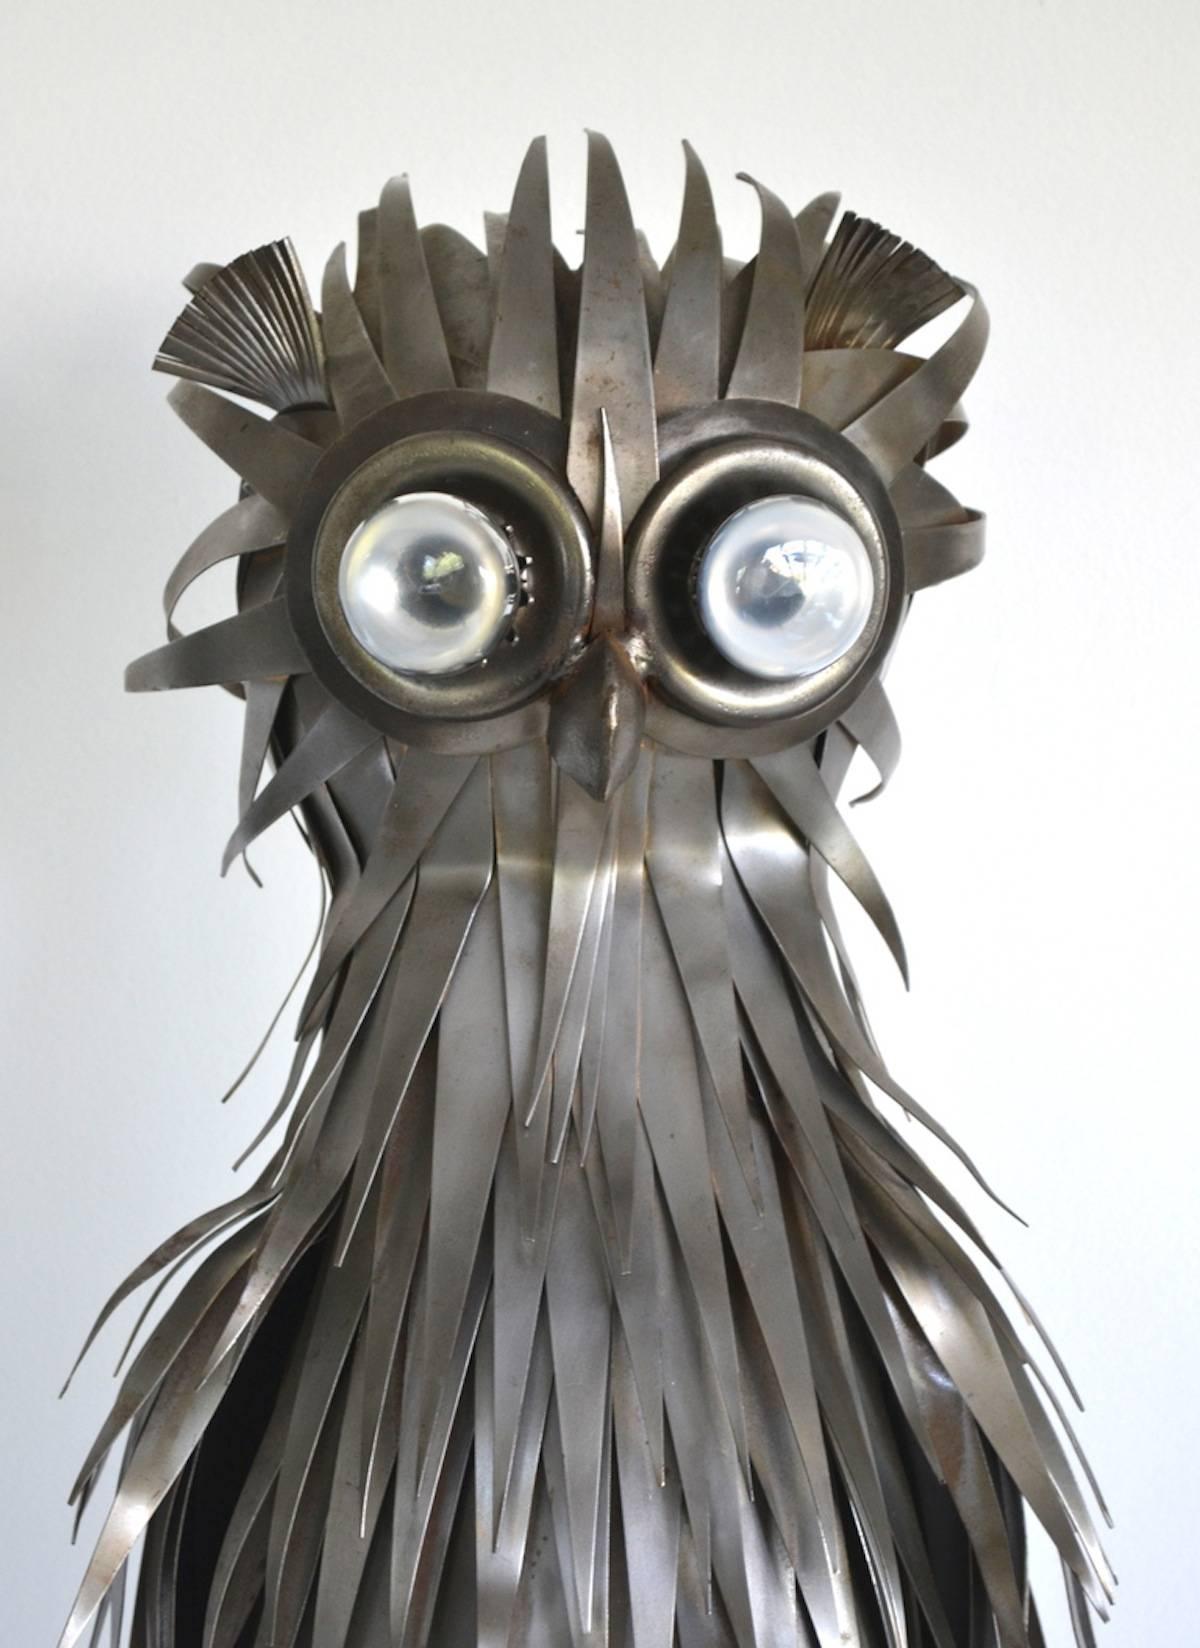 Mid-20th Century Midcentury Brutalist Inspired French Sculptural Owl Form Table Lamp by Jarry For Sale